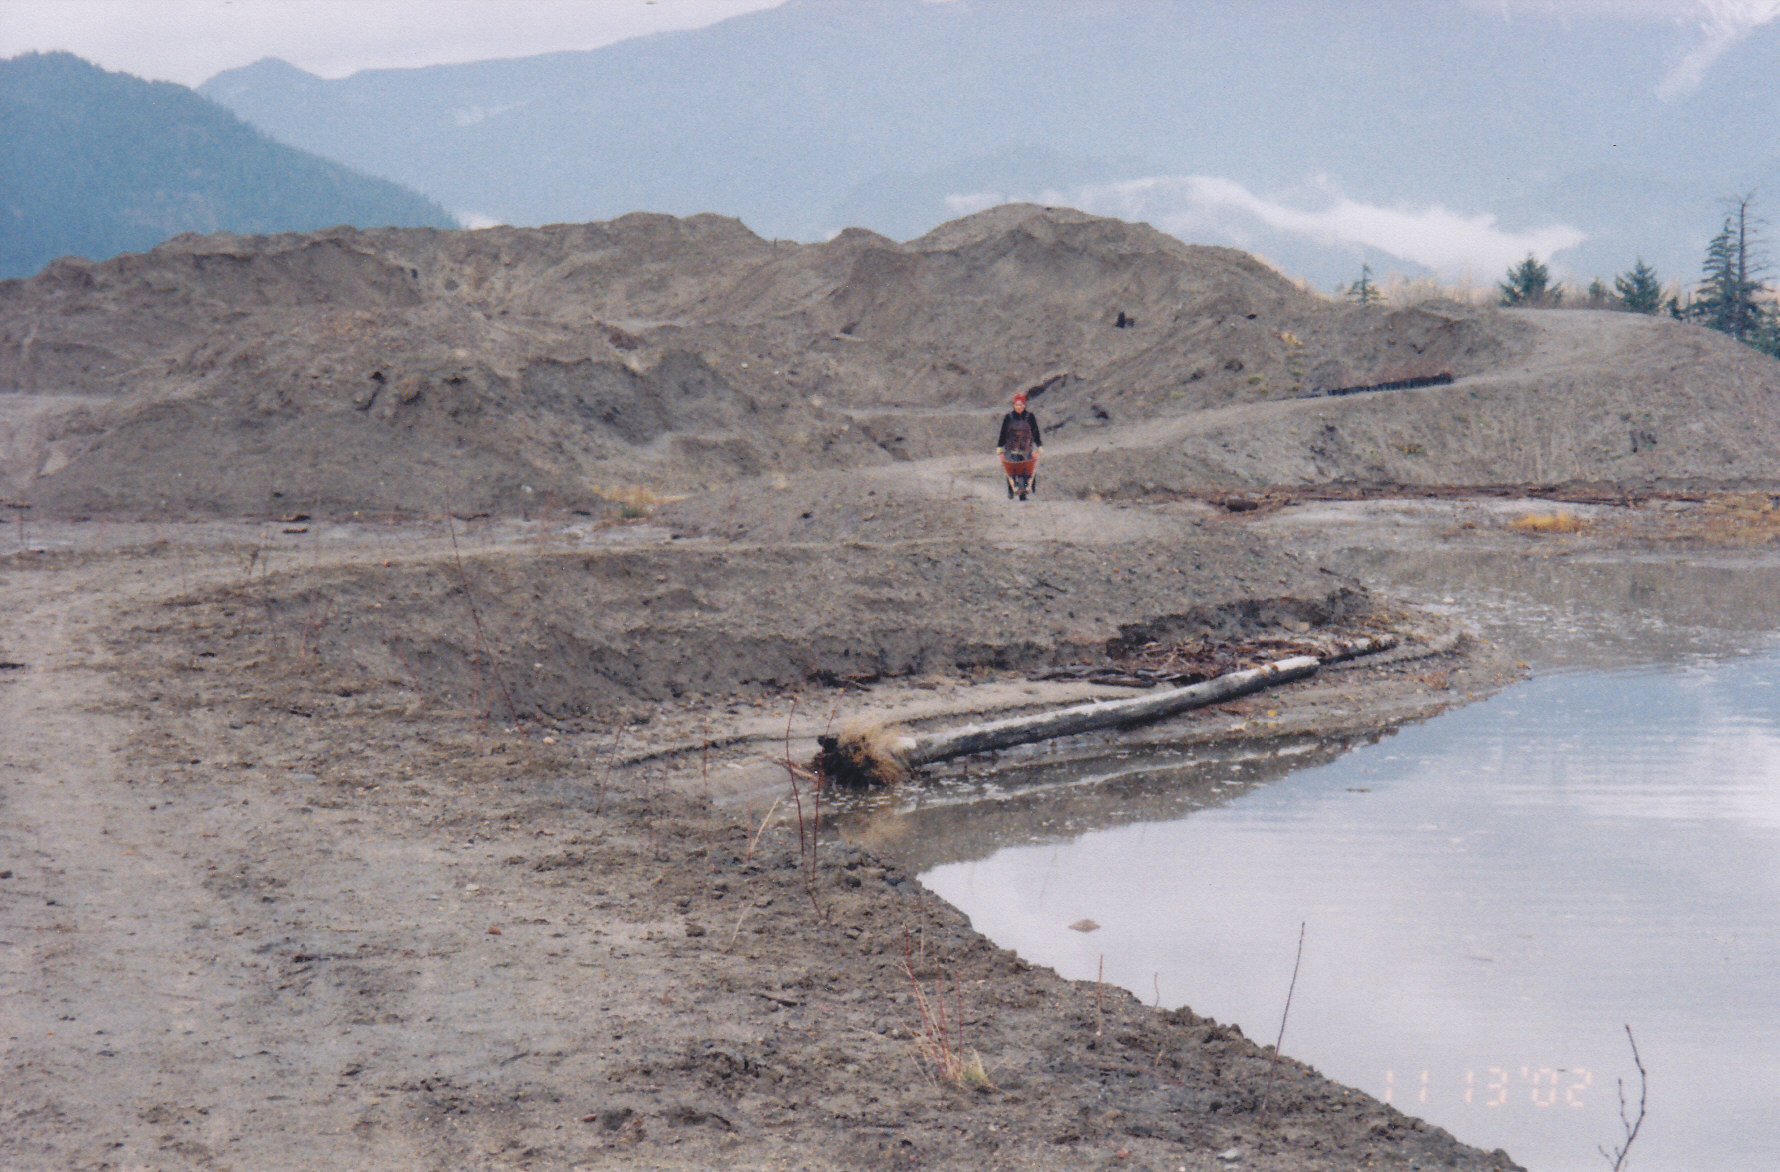 Squamish estuary: A photo of the Squamish estuary before undergoing restoration, showing a barren, brown dirt landscape with mountains in the background. A long figure is visible biking on a dirt path. A fallen log and large puddle are in the foreground.